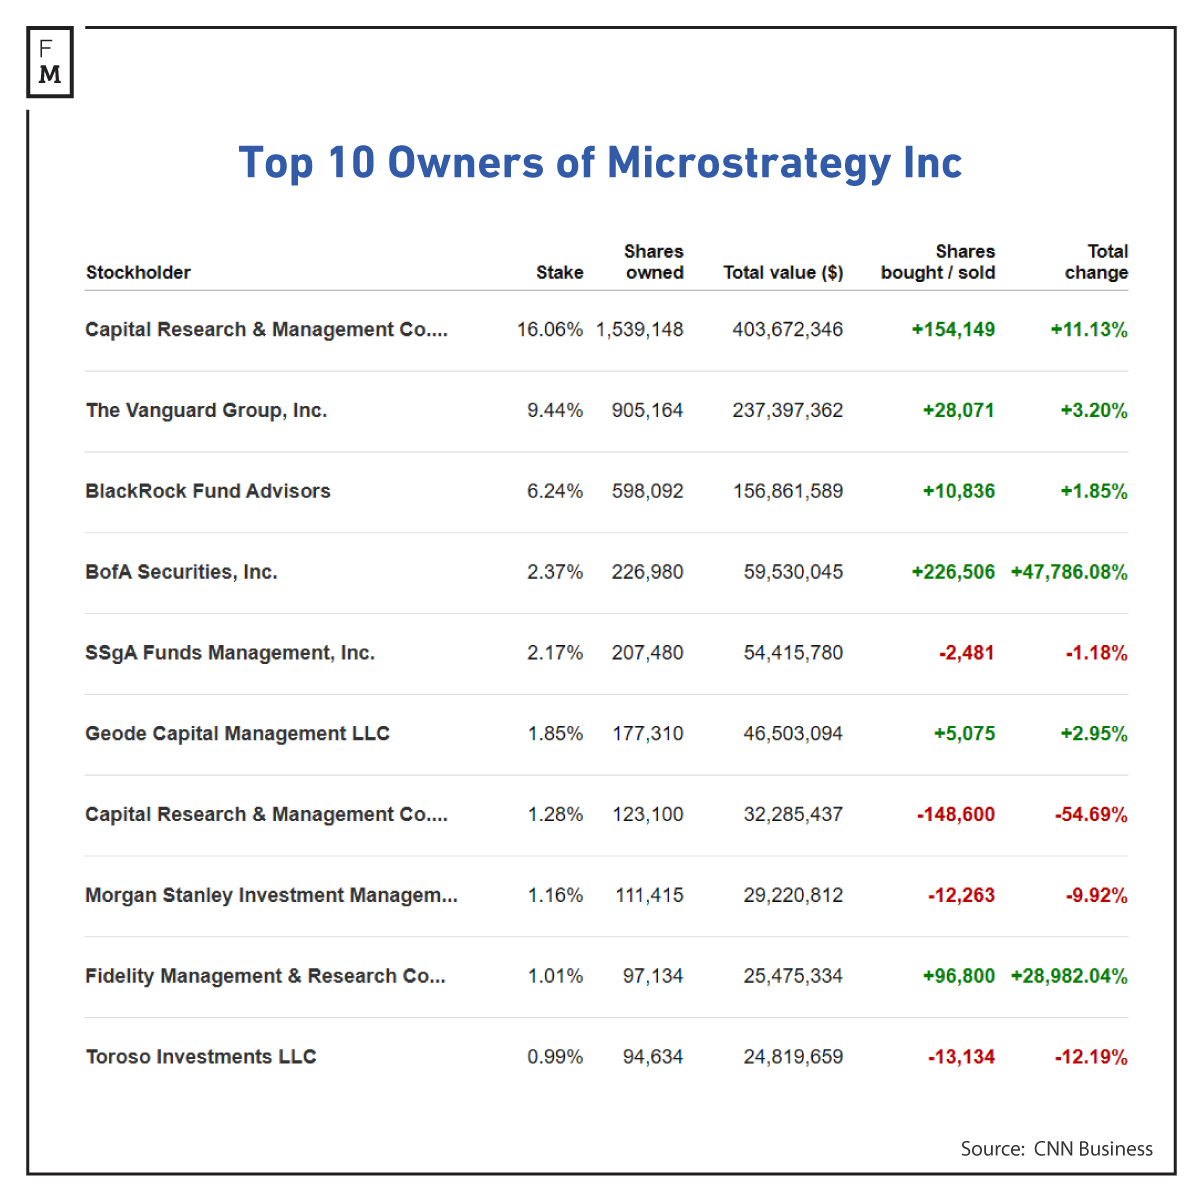 Top 10 Owners of Microstrategy Inc